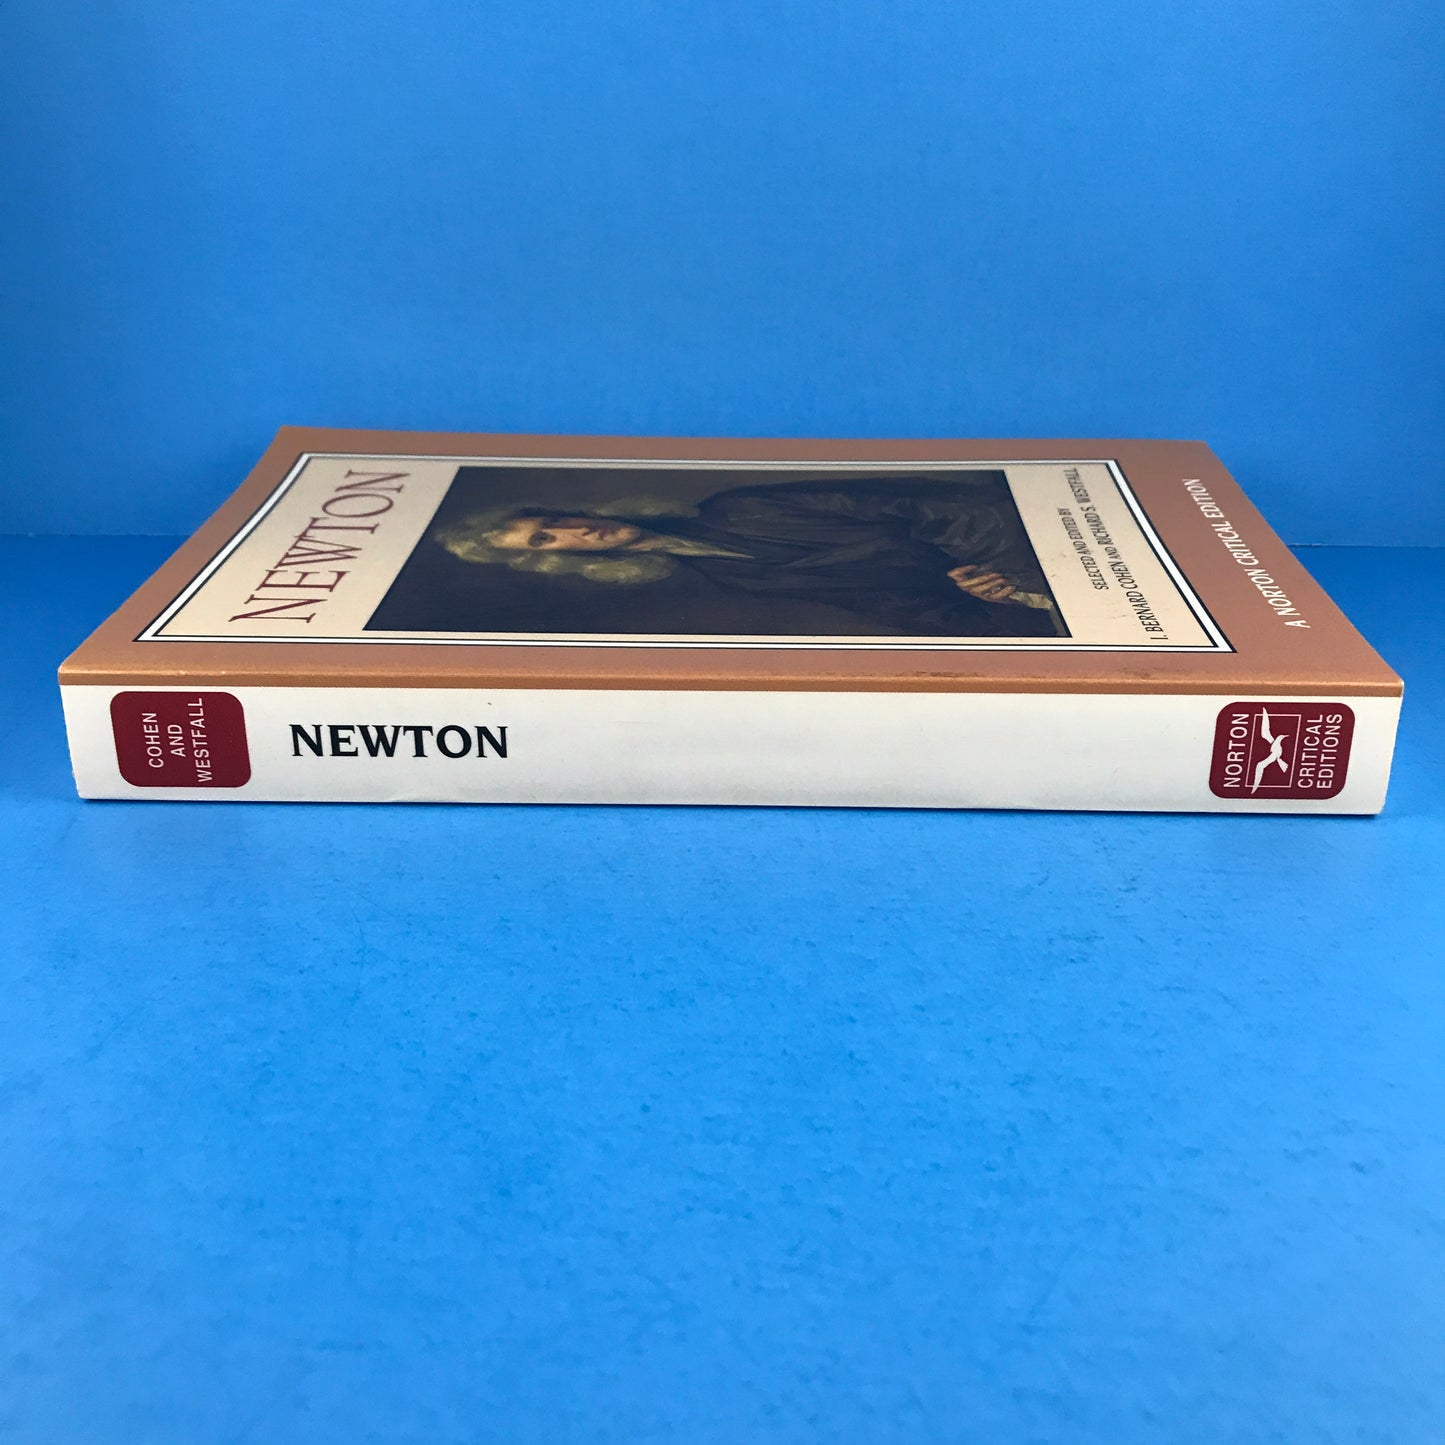 Newton: Texts, Backgrounds, Commentaries